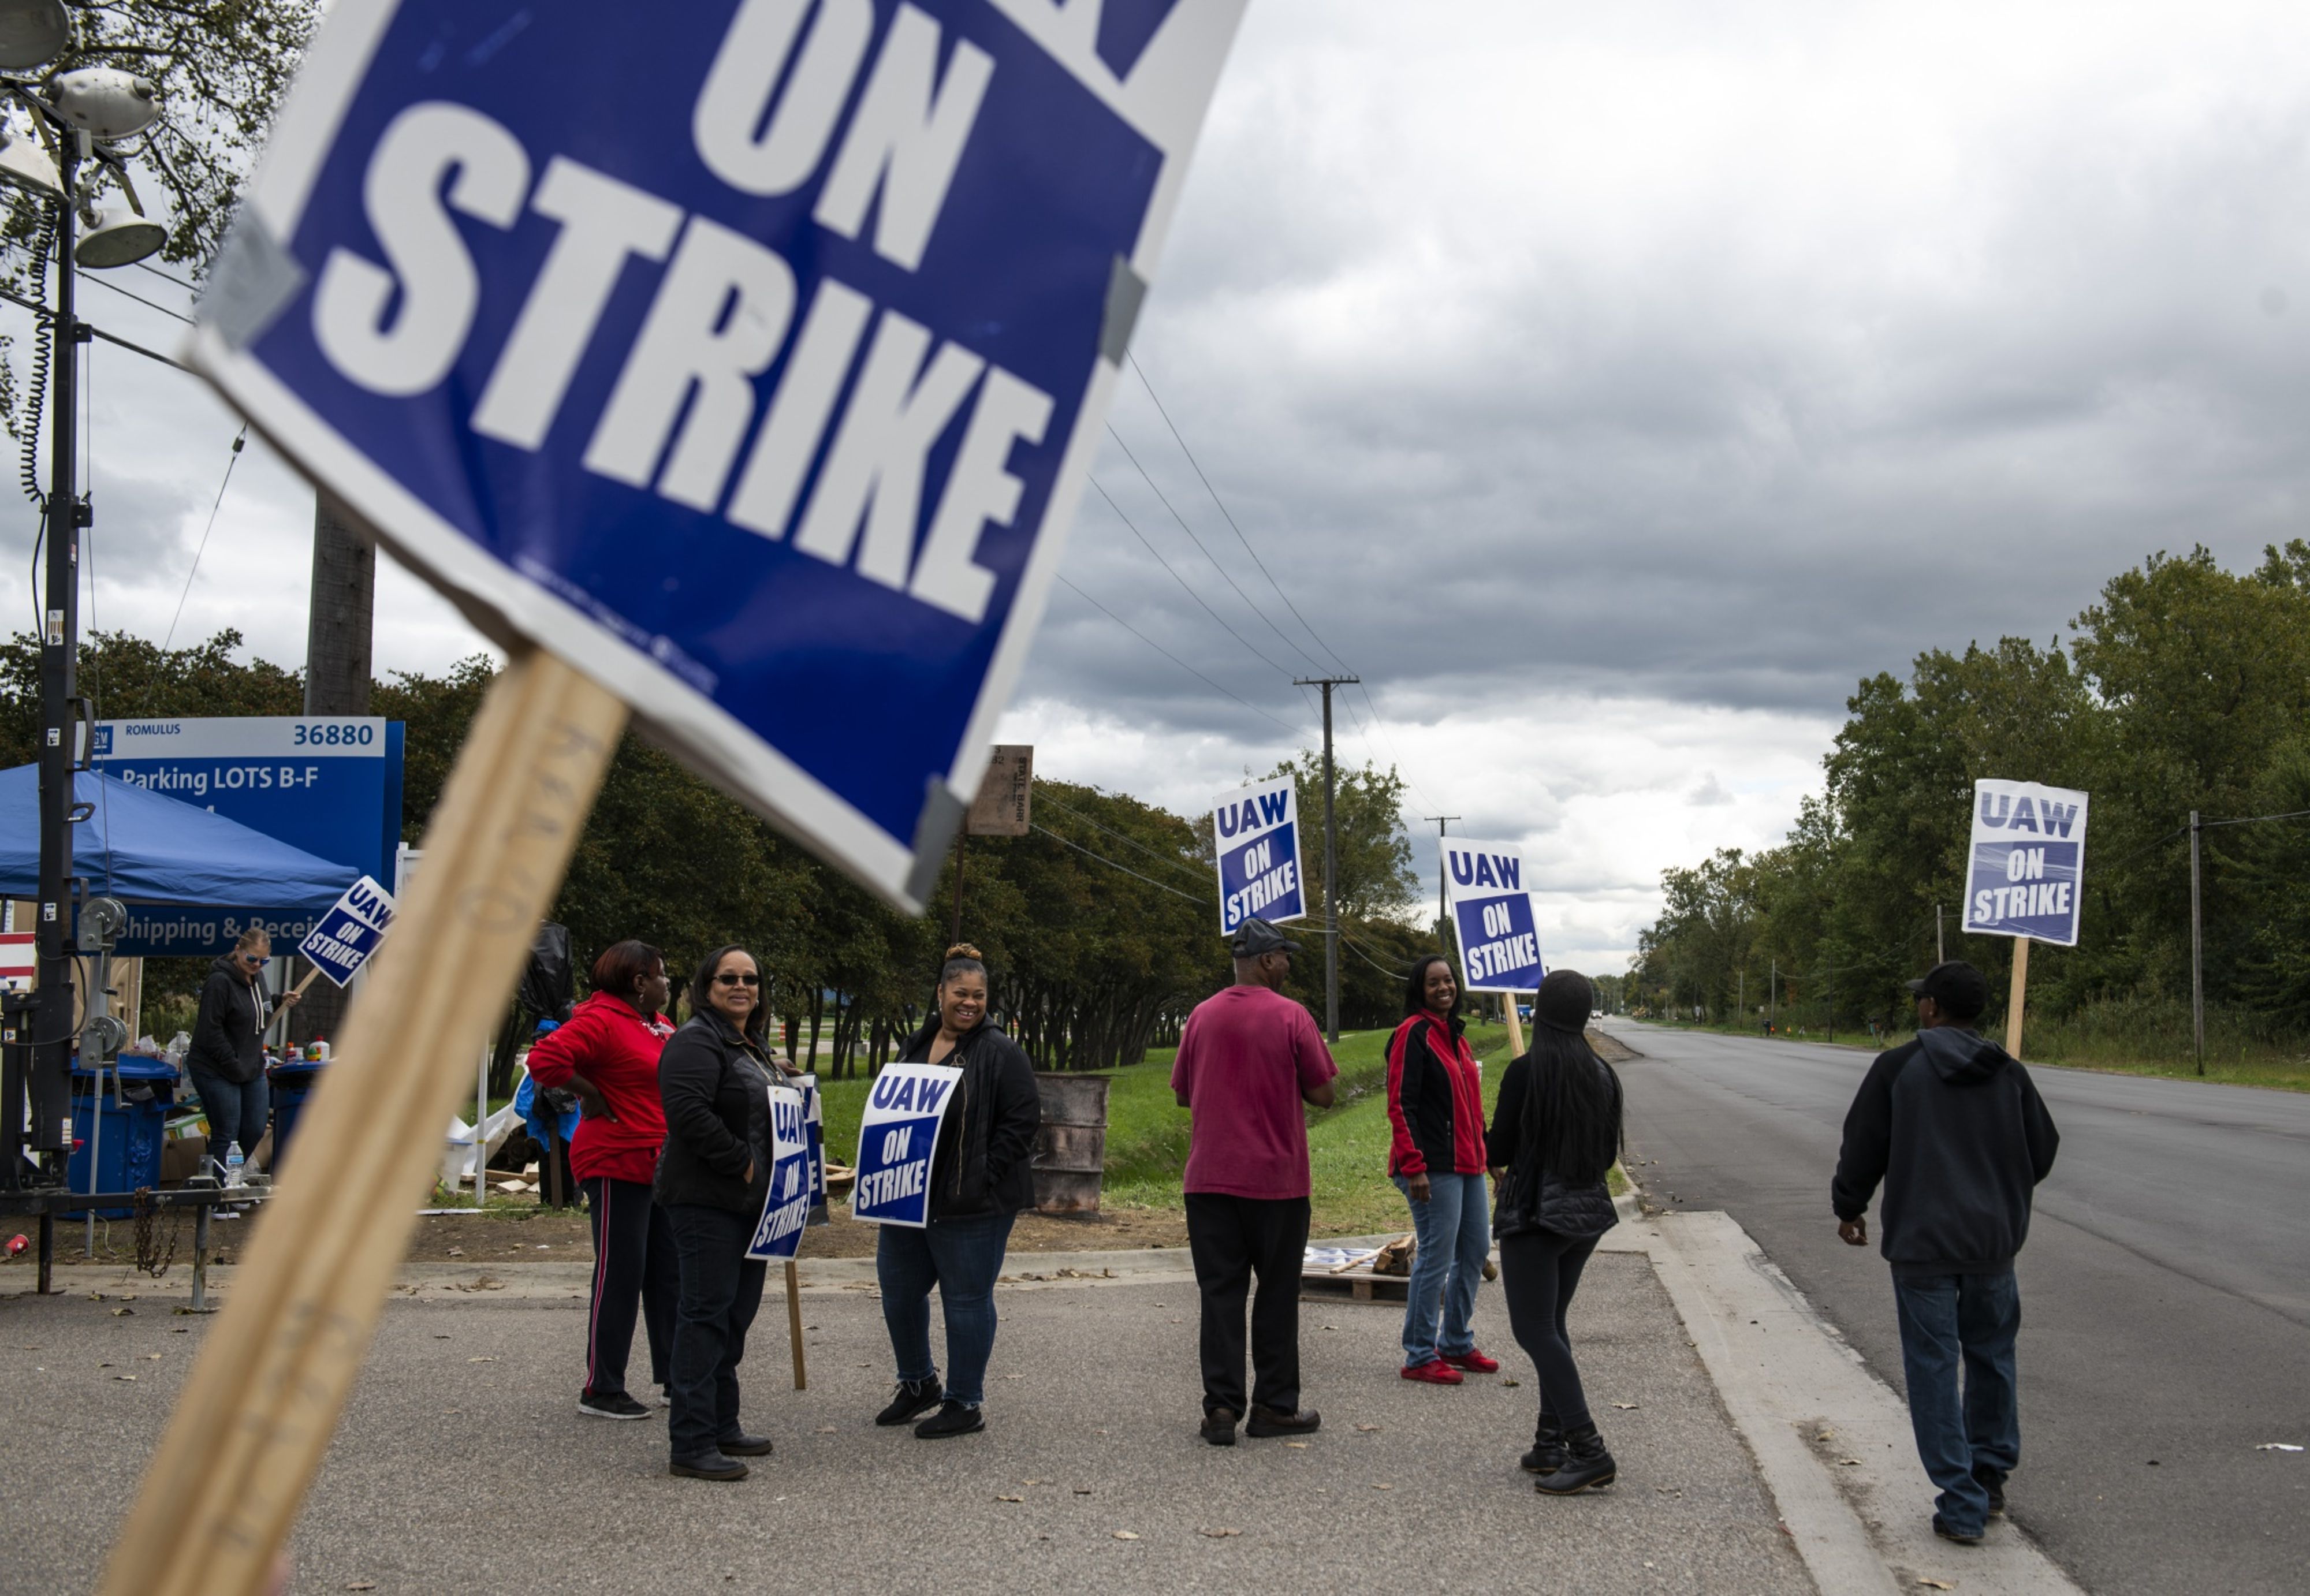 Demonstrators hold signs during a United Auto Workers (UAW) strike outside the General Motors plant in Romulus, Michigan on Friday, Oct. 4, 2019. Photographer: Brittany Greeson/Bloomberg